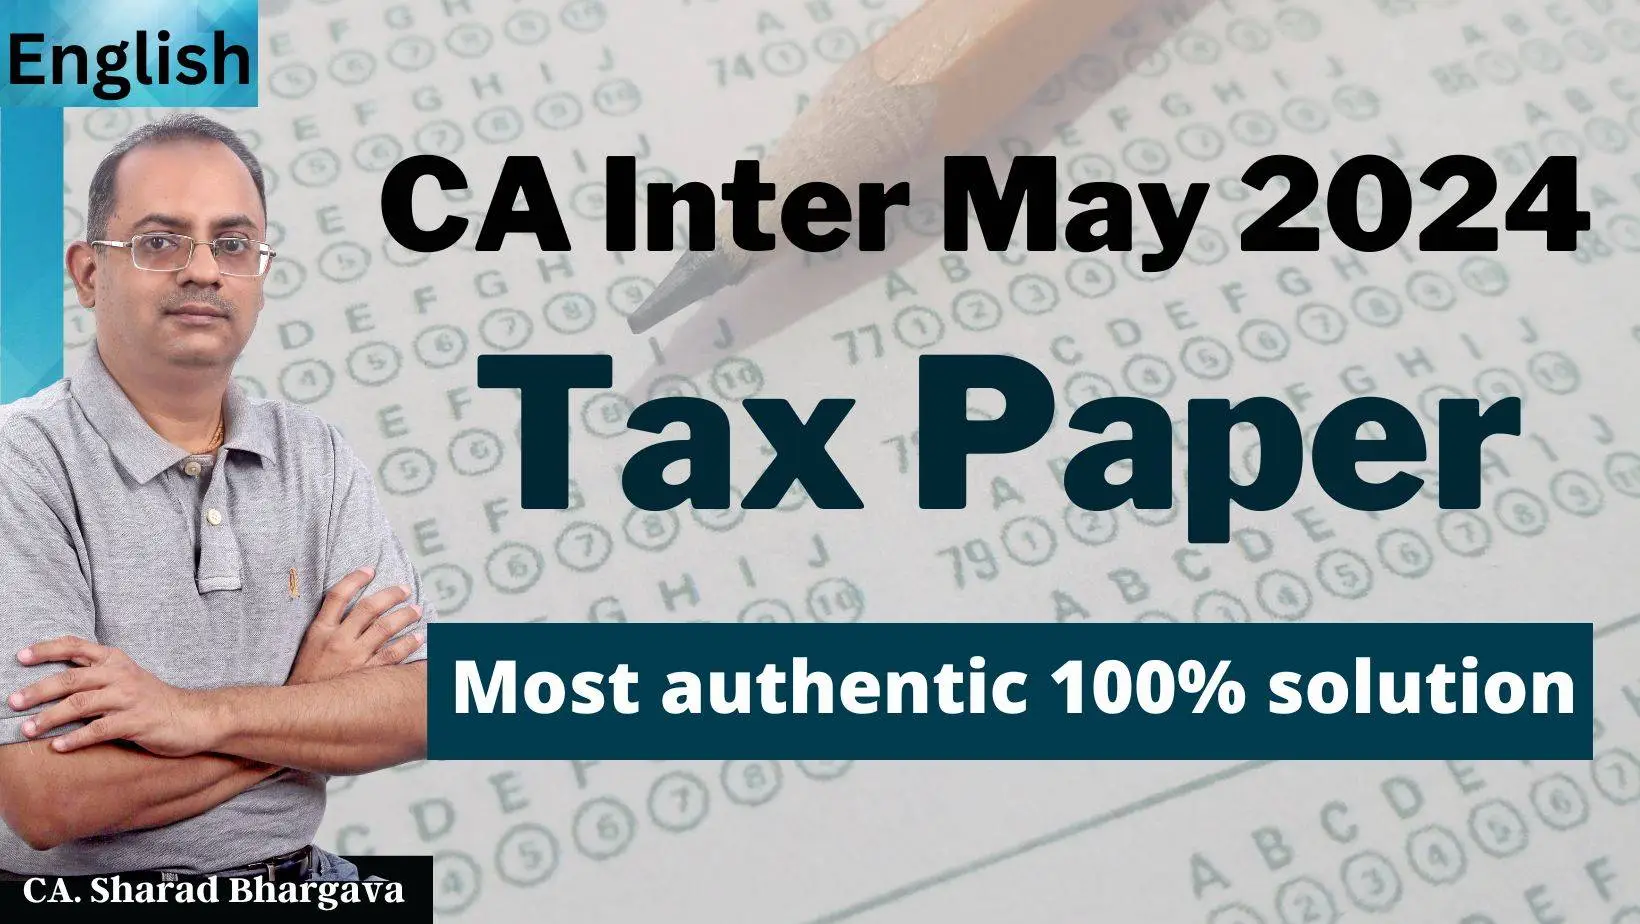 (English) / CA Inter May 2024 TAX paper - Most authentic 100% solution / CA. Sharad Bhargava